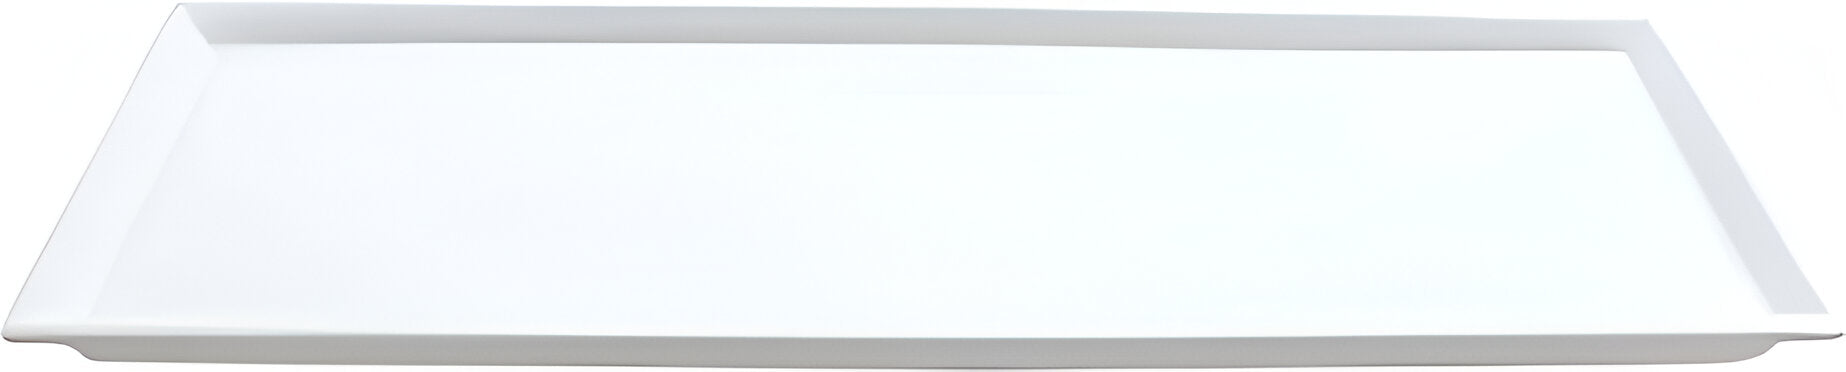 Bugambilia - 20.13" White Rectangular Serving Plate With Lid Cover - LCIH1/2L-MOD-WW